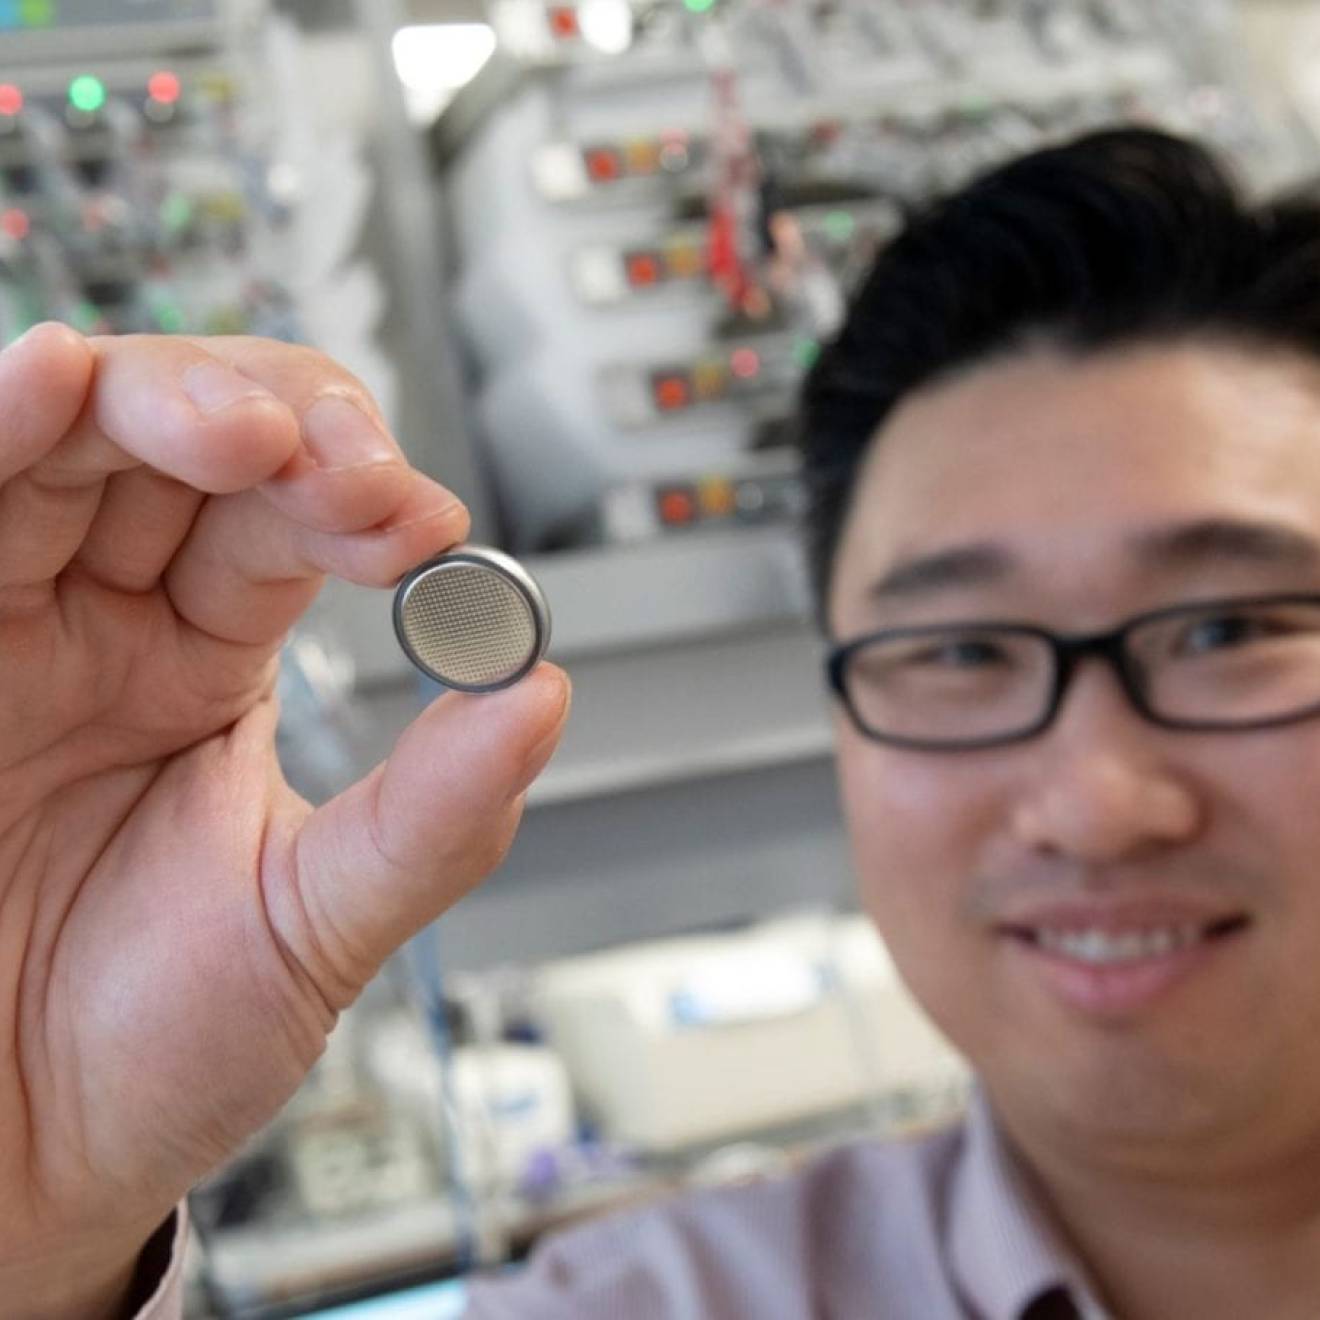 Huolin Xin, UC Irvine professor of physics & astronomy, holds up a small battery